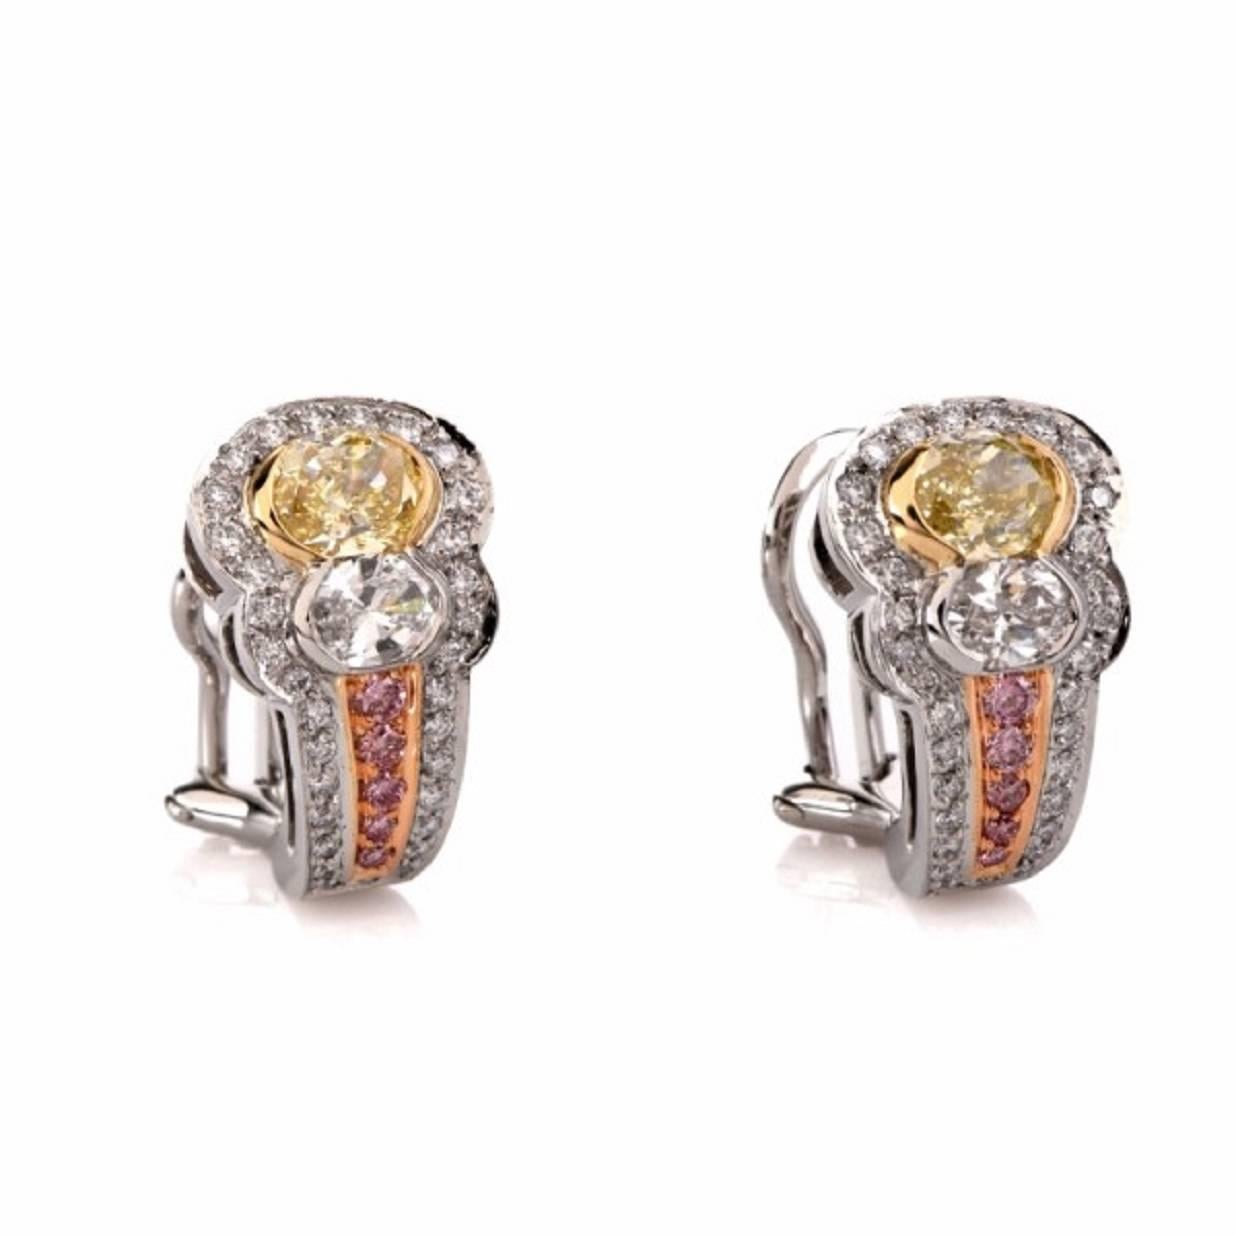 These  Charles Krypell  clip-back earrings with Natural fancy yellow,  pink and colorless diamonds are crafted in solid platinum, weigh 13.4 grams and measure 18 mm long and 11 mm wide.This highly ornate and vivacious aesthetic,  these designer